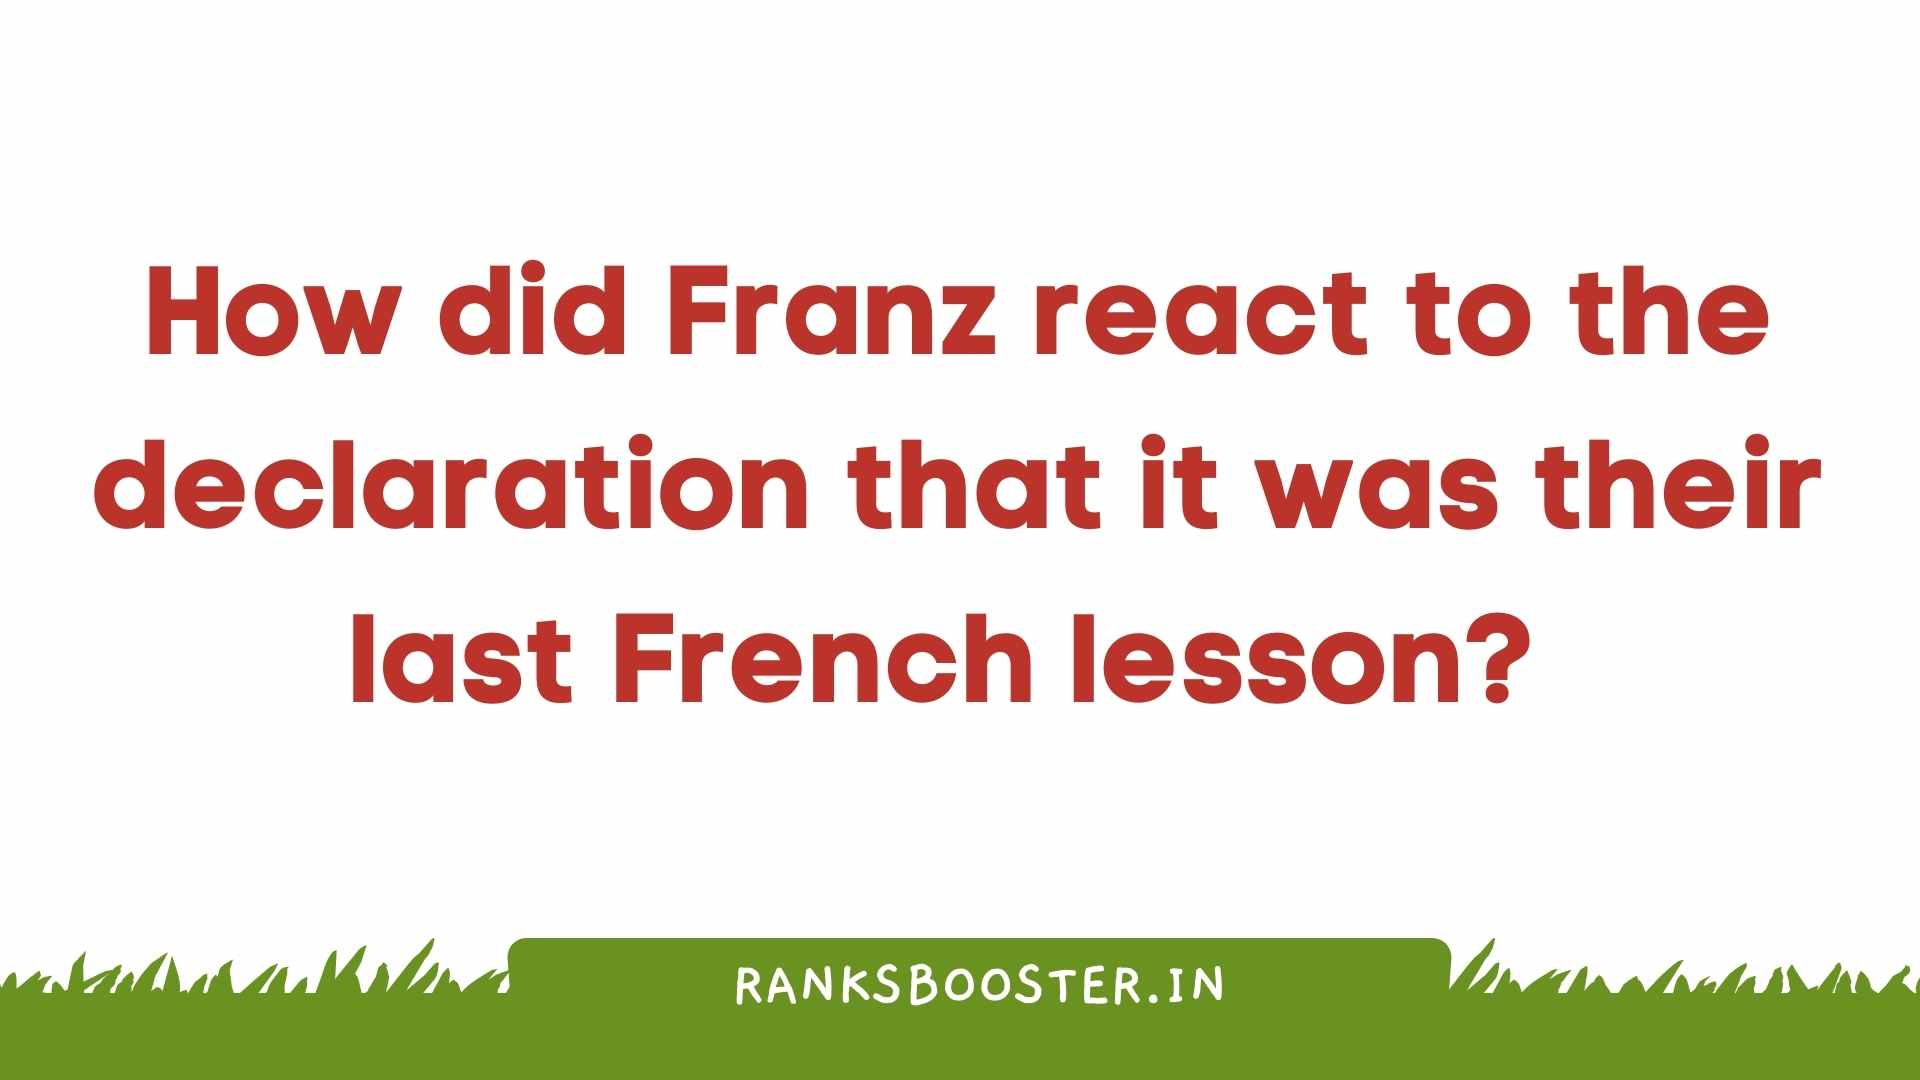 How did Franz react to the declaration that it was their last French lesson?